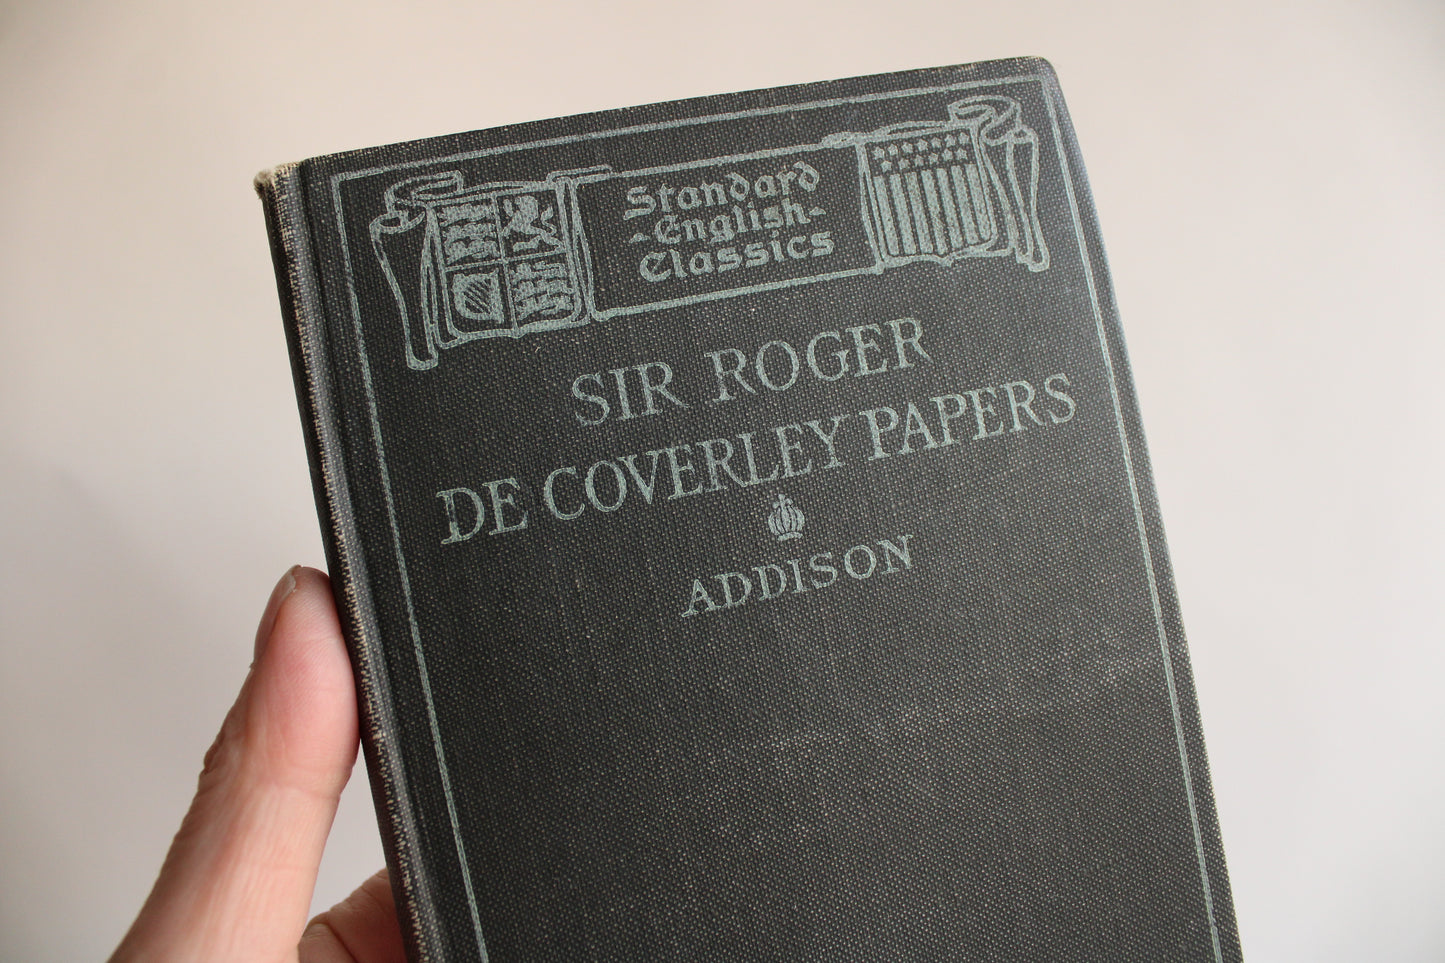 Antique 1800s Book, "Sir Roger DeCoverly Papers"